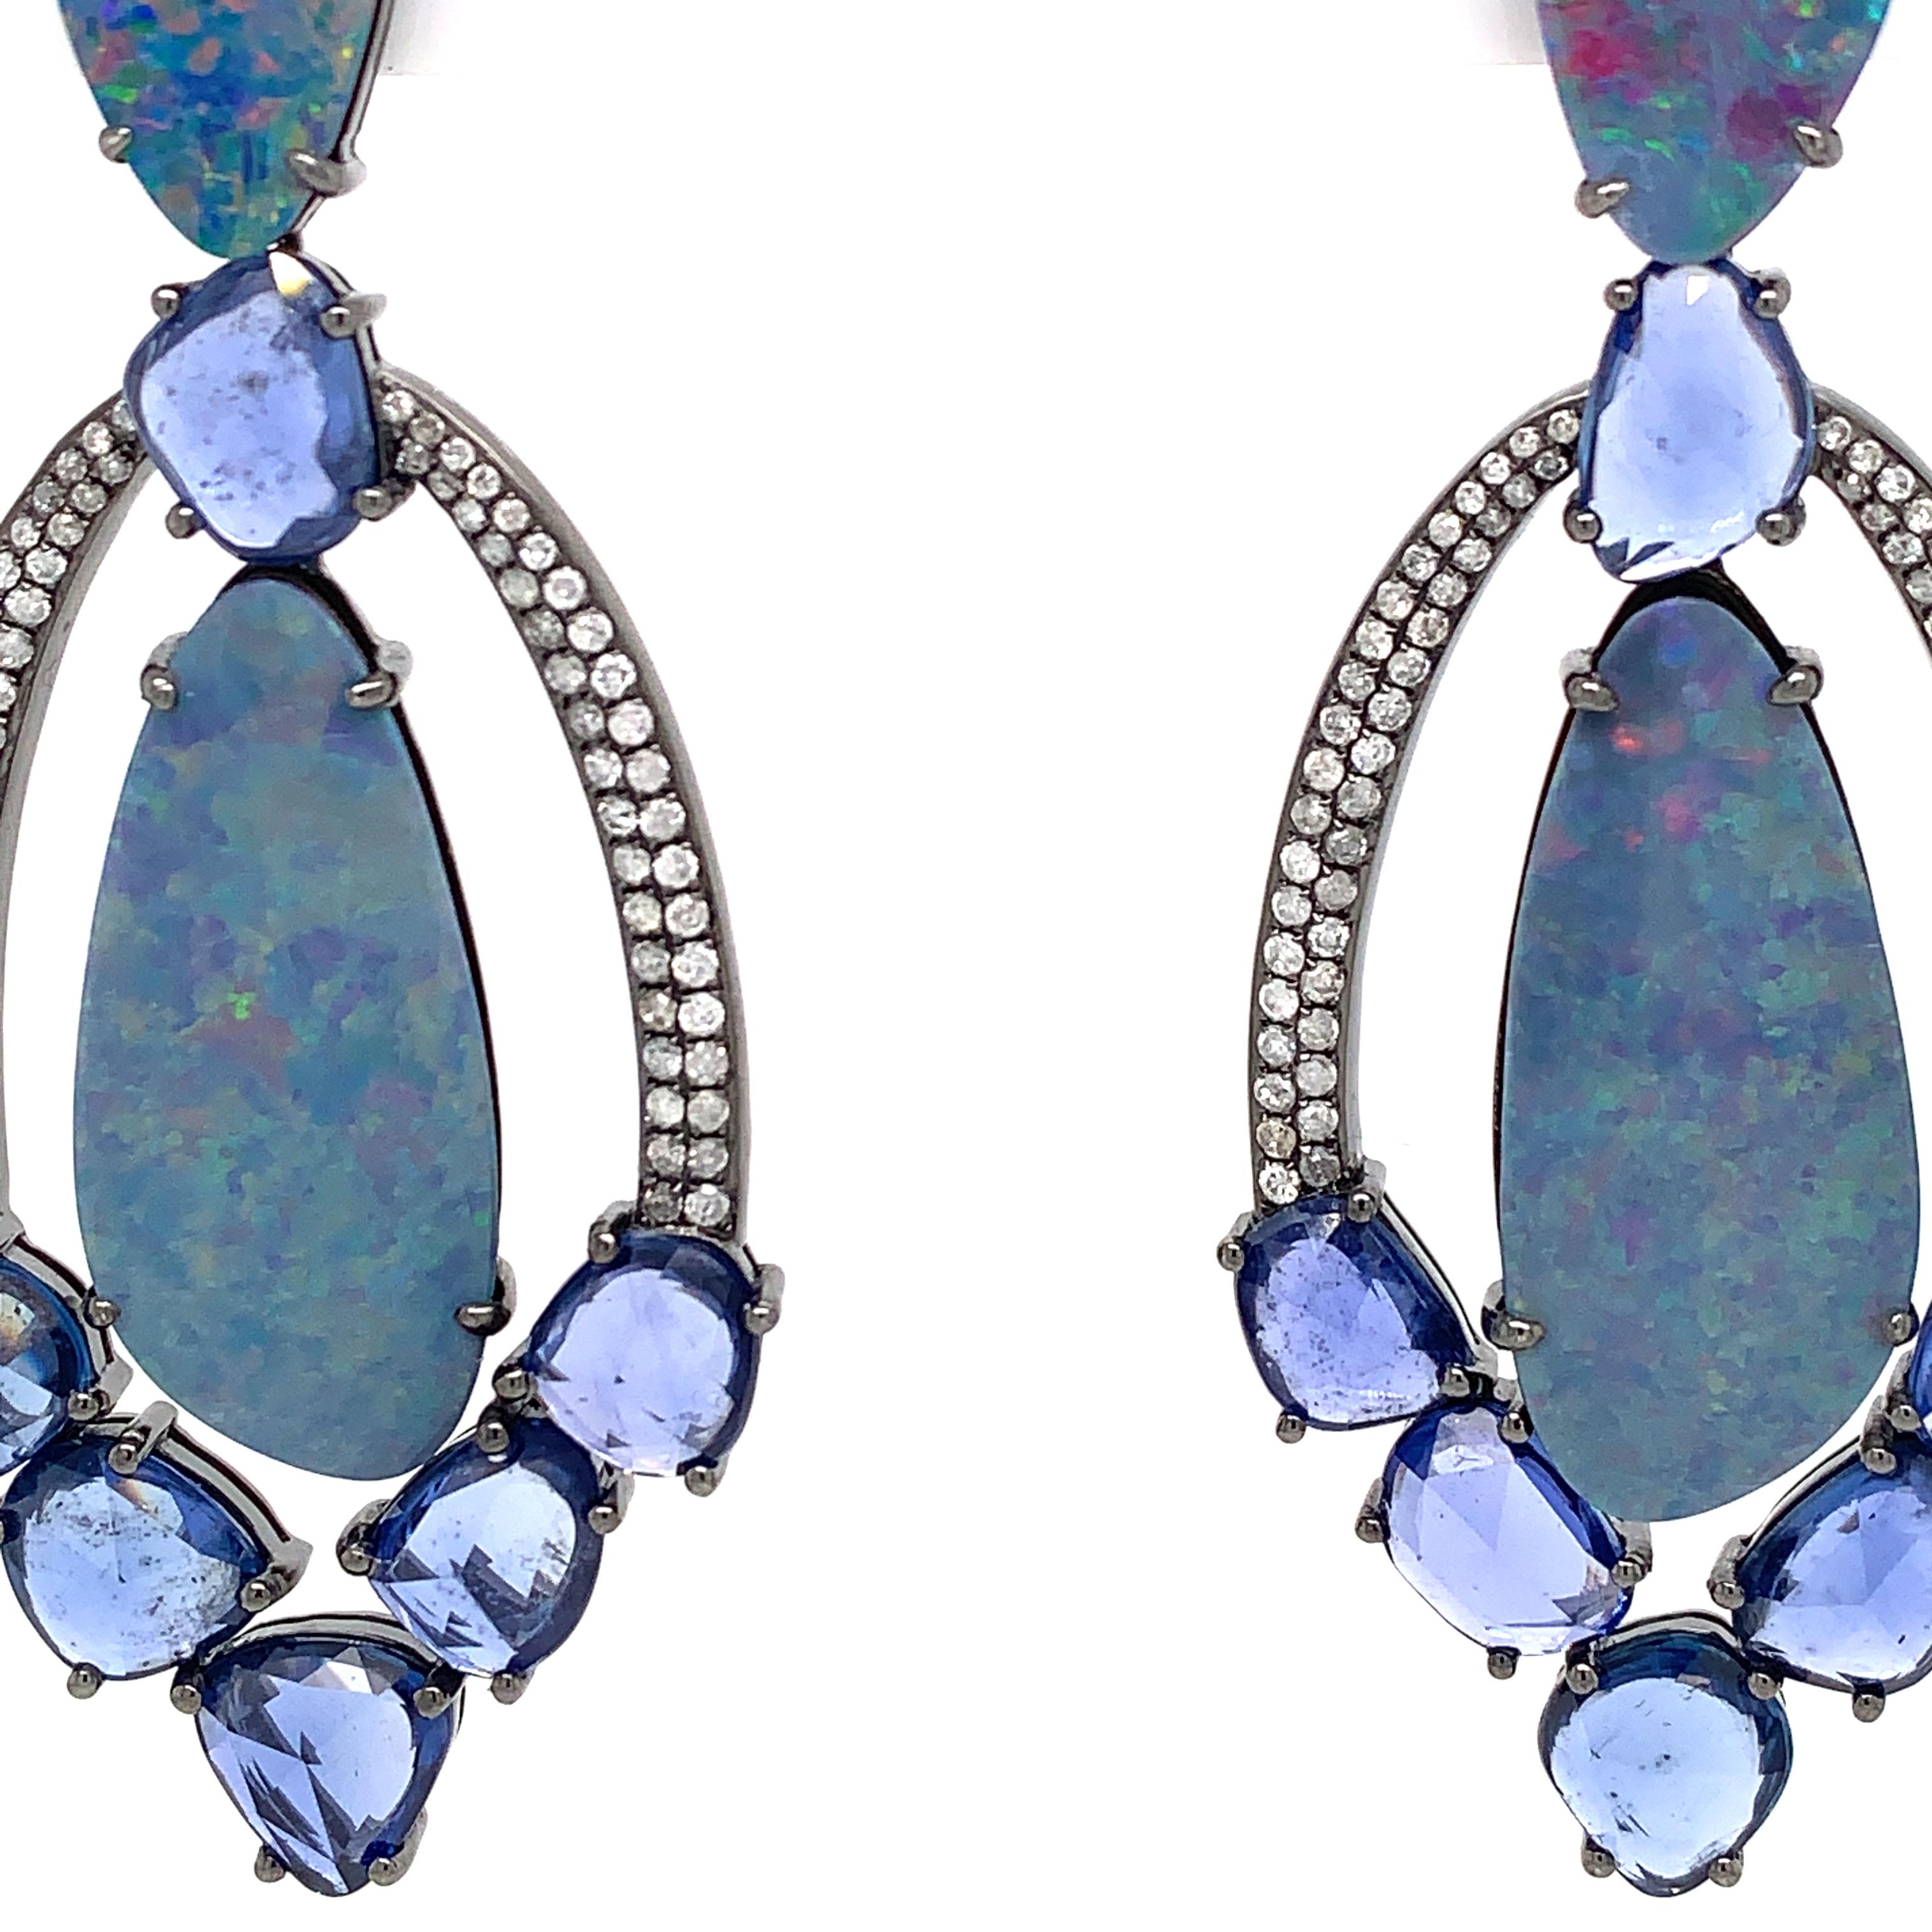 Ocean Bliss Collection

Boulder Opal, blue Sapphire slice and Diamond pavé chandelier earrings set in 18K black rhodium gold.

Opal: 16.70ct total weight.
Blue Sapphire: 12.6ct total weight.
Diamonds: 0.85ct total weight.
All diamonds are G-H/SI